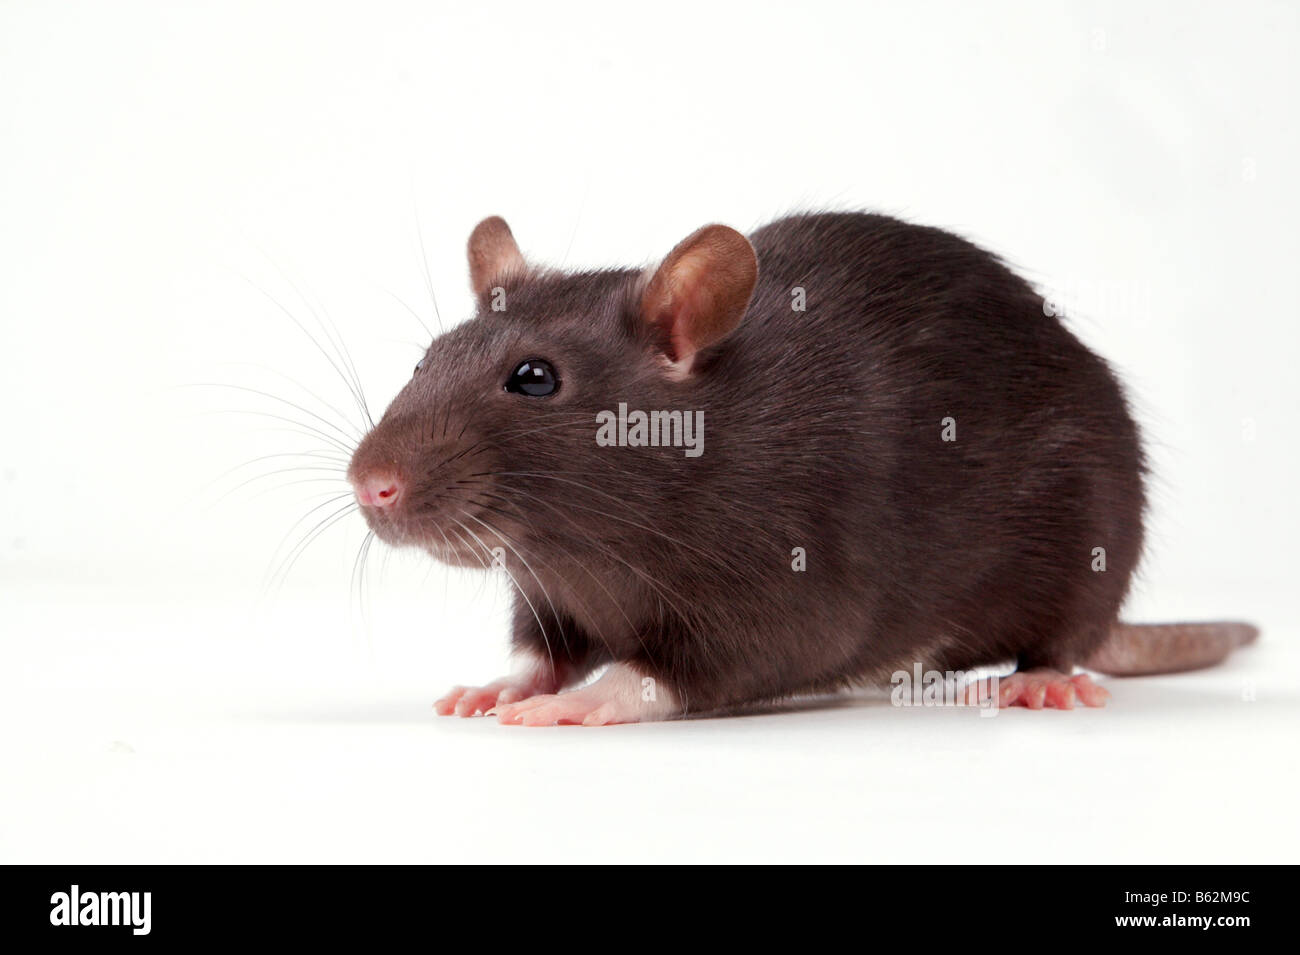 Rats very clever and artful rodents Stock Photo